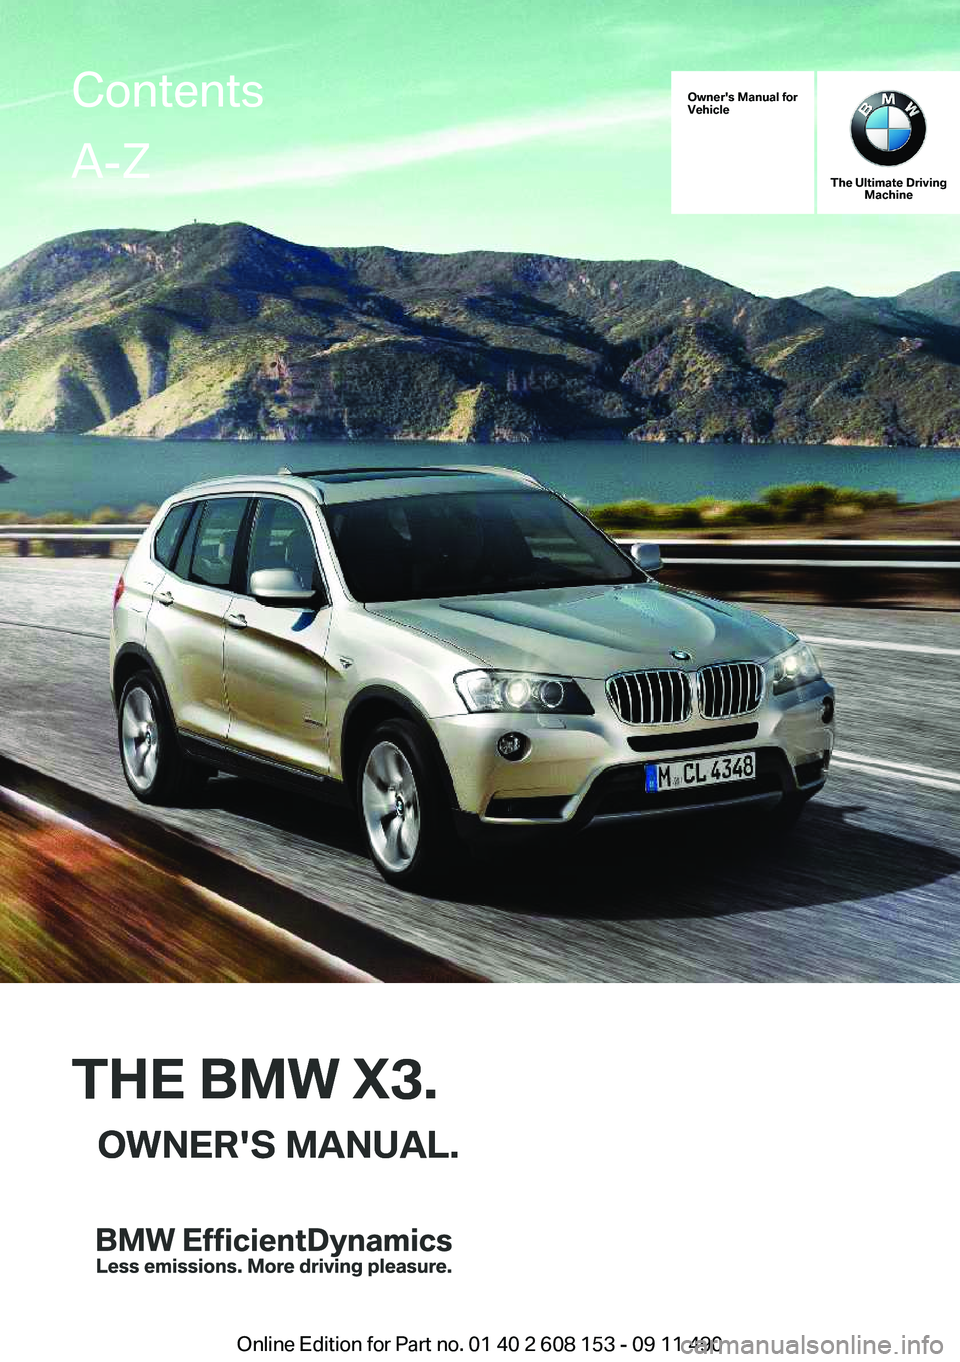 BMW X3 2012  Owners Manual Owner's Manual for
Vehicle
THE BMW X3.OWNER'S MANUAL.
The Ultimate Driving Machine
THE BMW X3.OWNER'S MANUAL.
ContentsA-Z
Online Edition for Part no. 01 40 2 608 153 - 09 11 490   